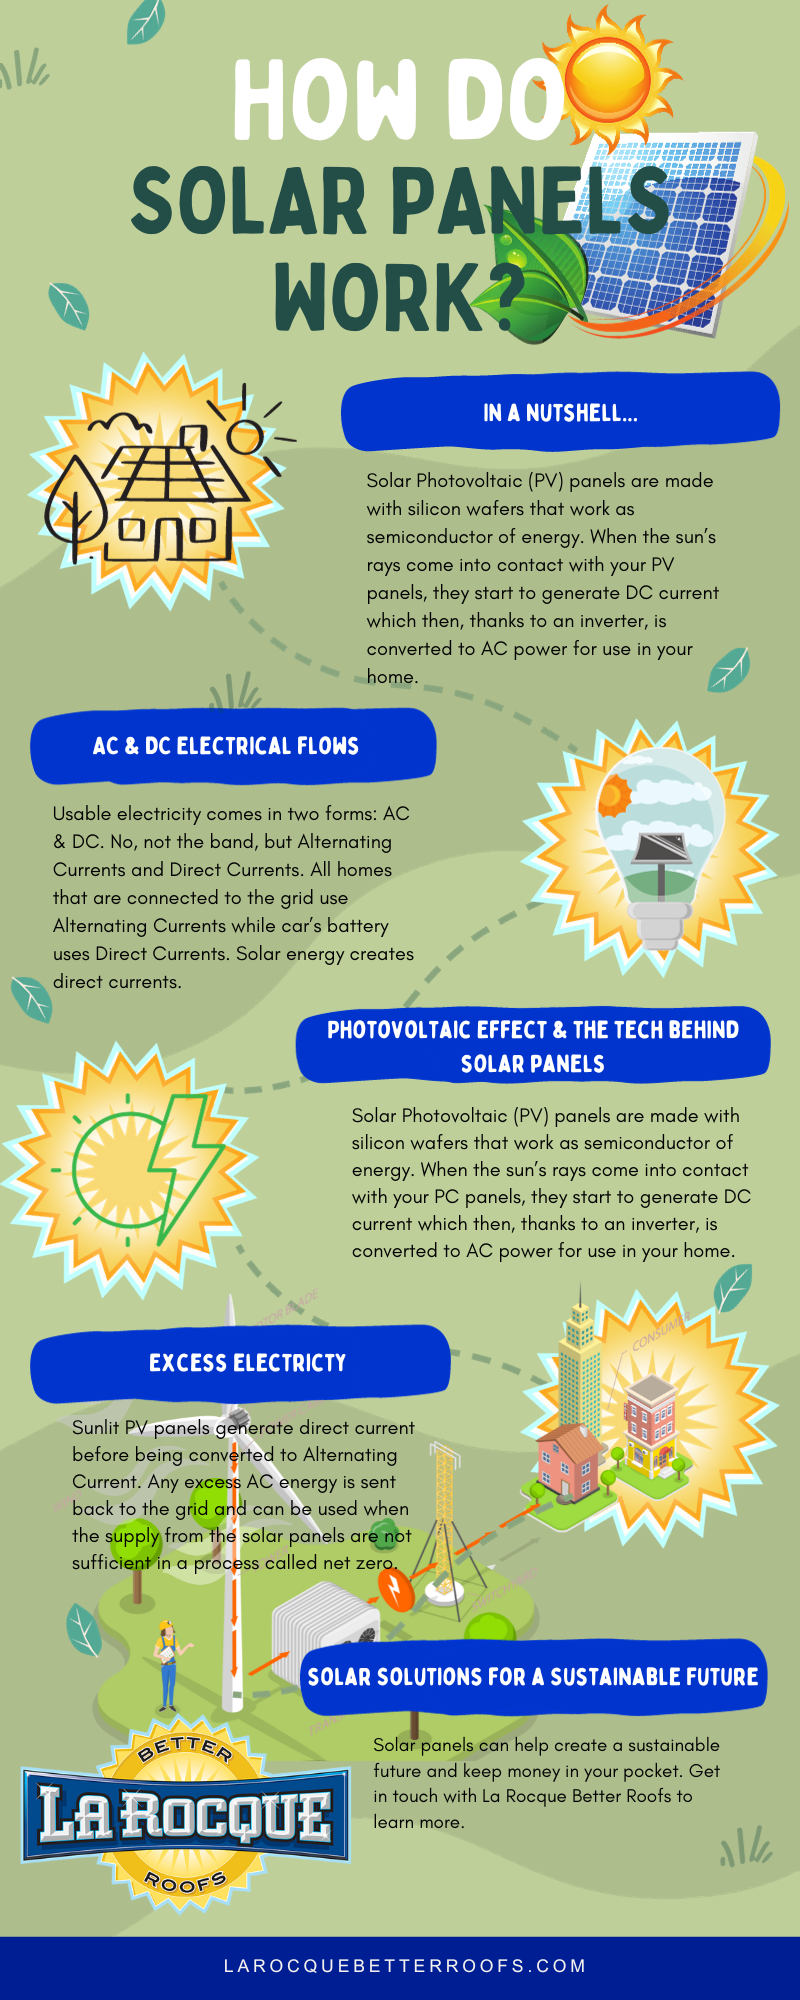 Infographic of How Do Solar Panels Work?